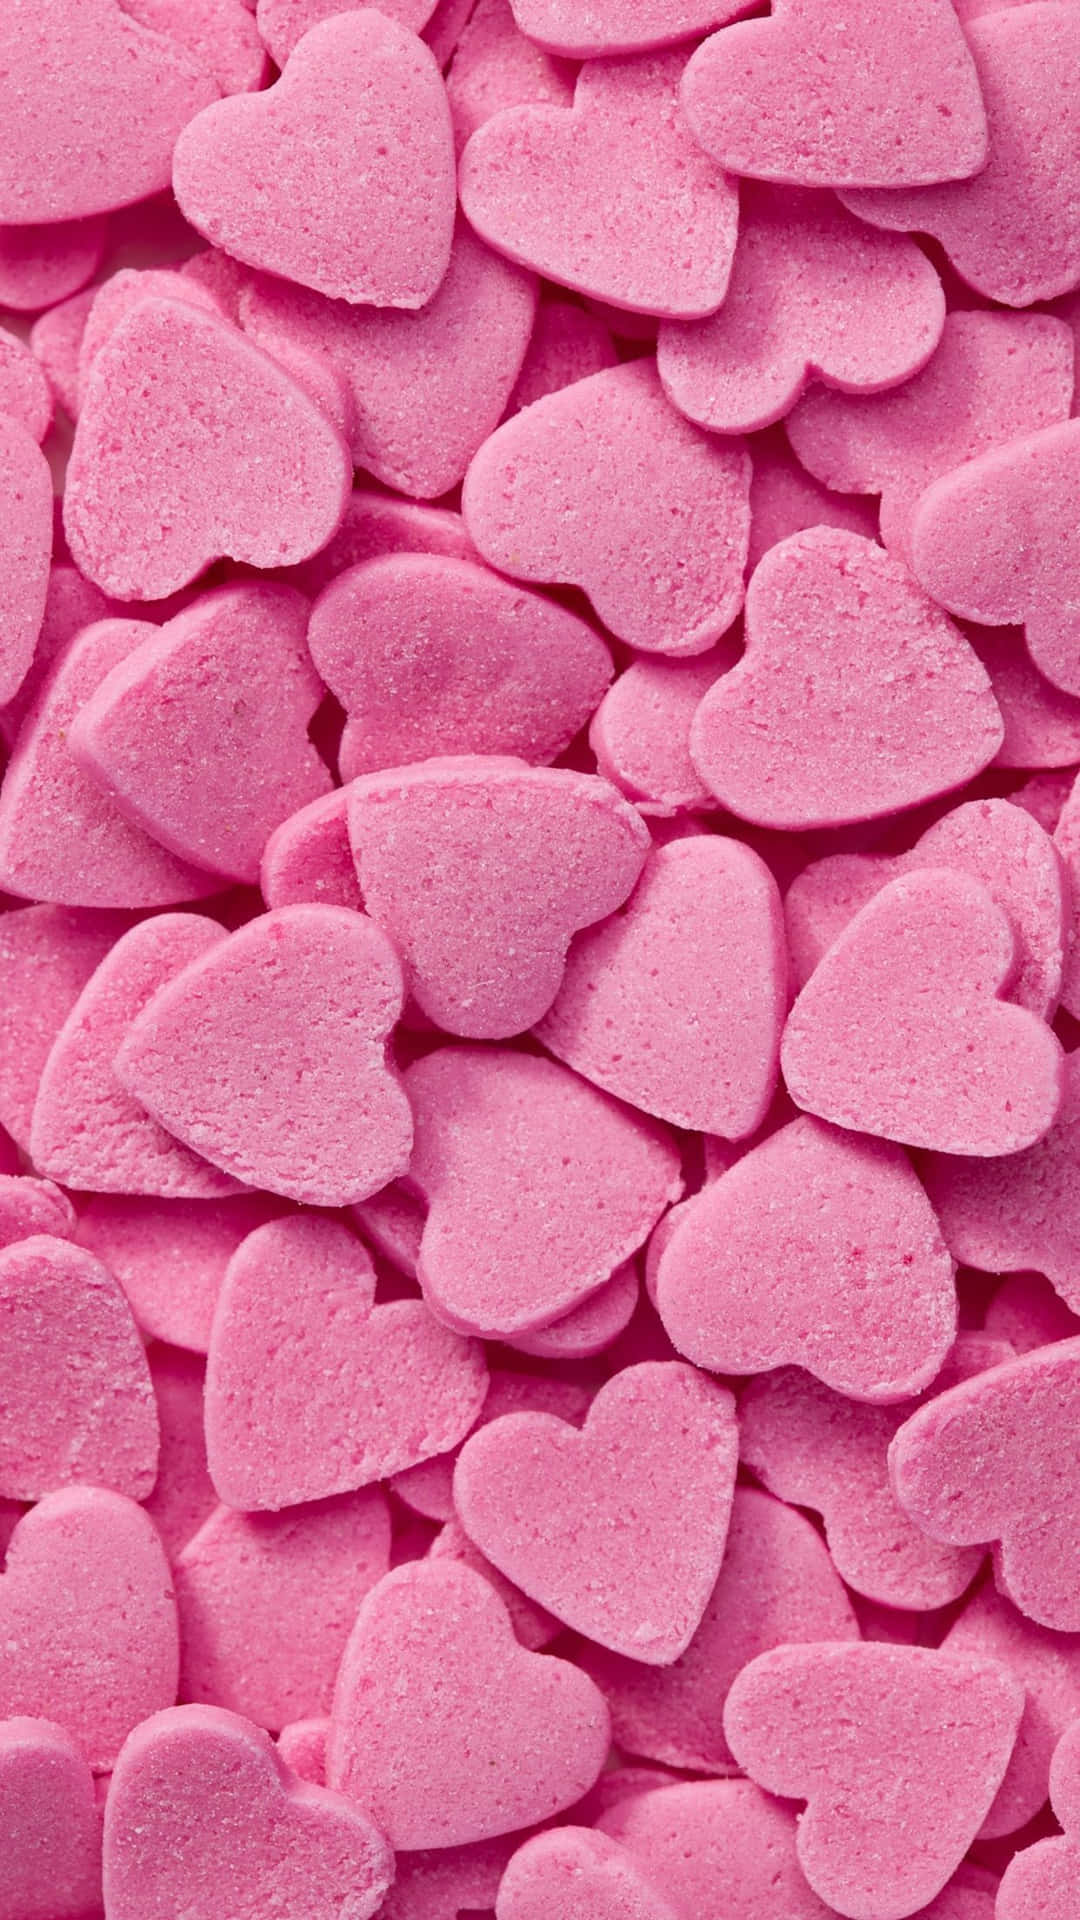 Tiny Candy Pink Hearts Iphone Wallpaper